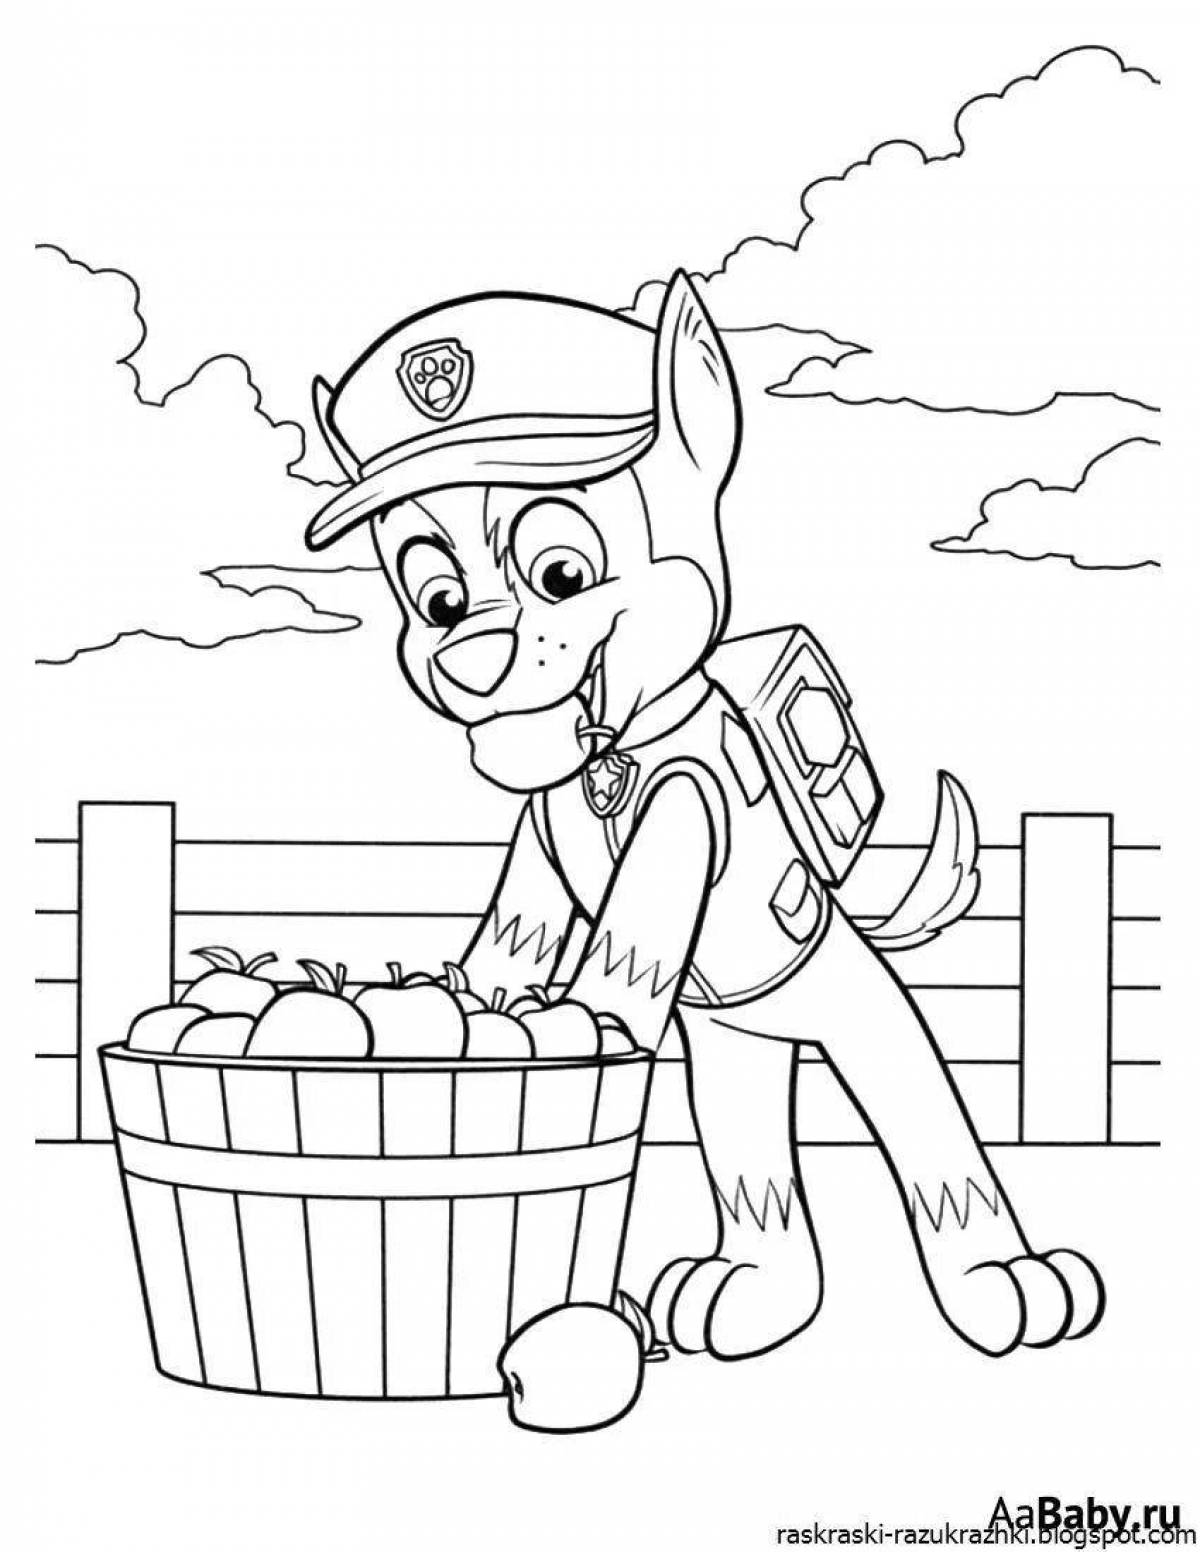 Gorgeous racer coloring pages for kids